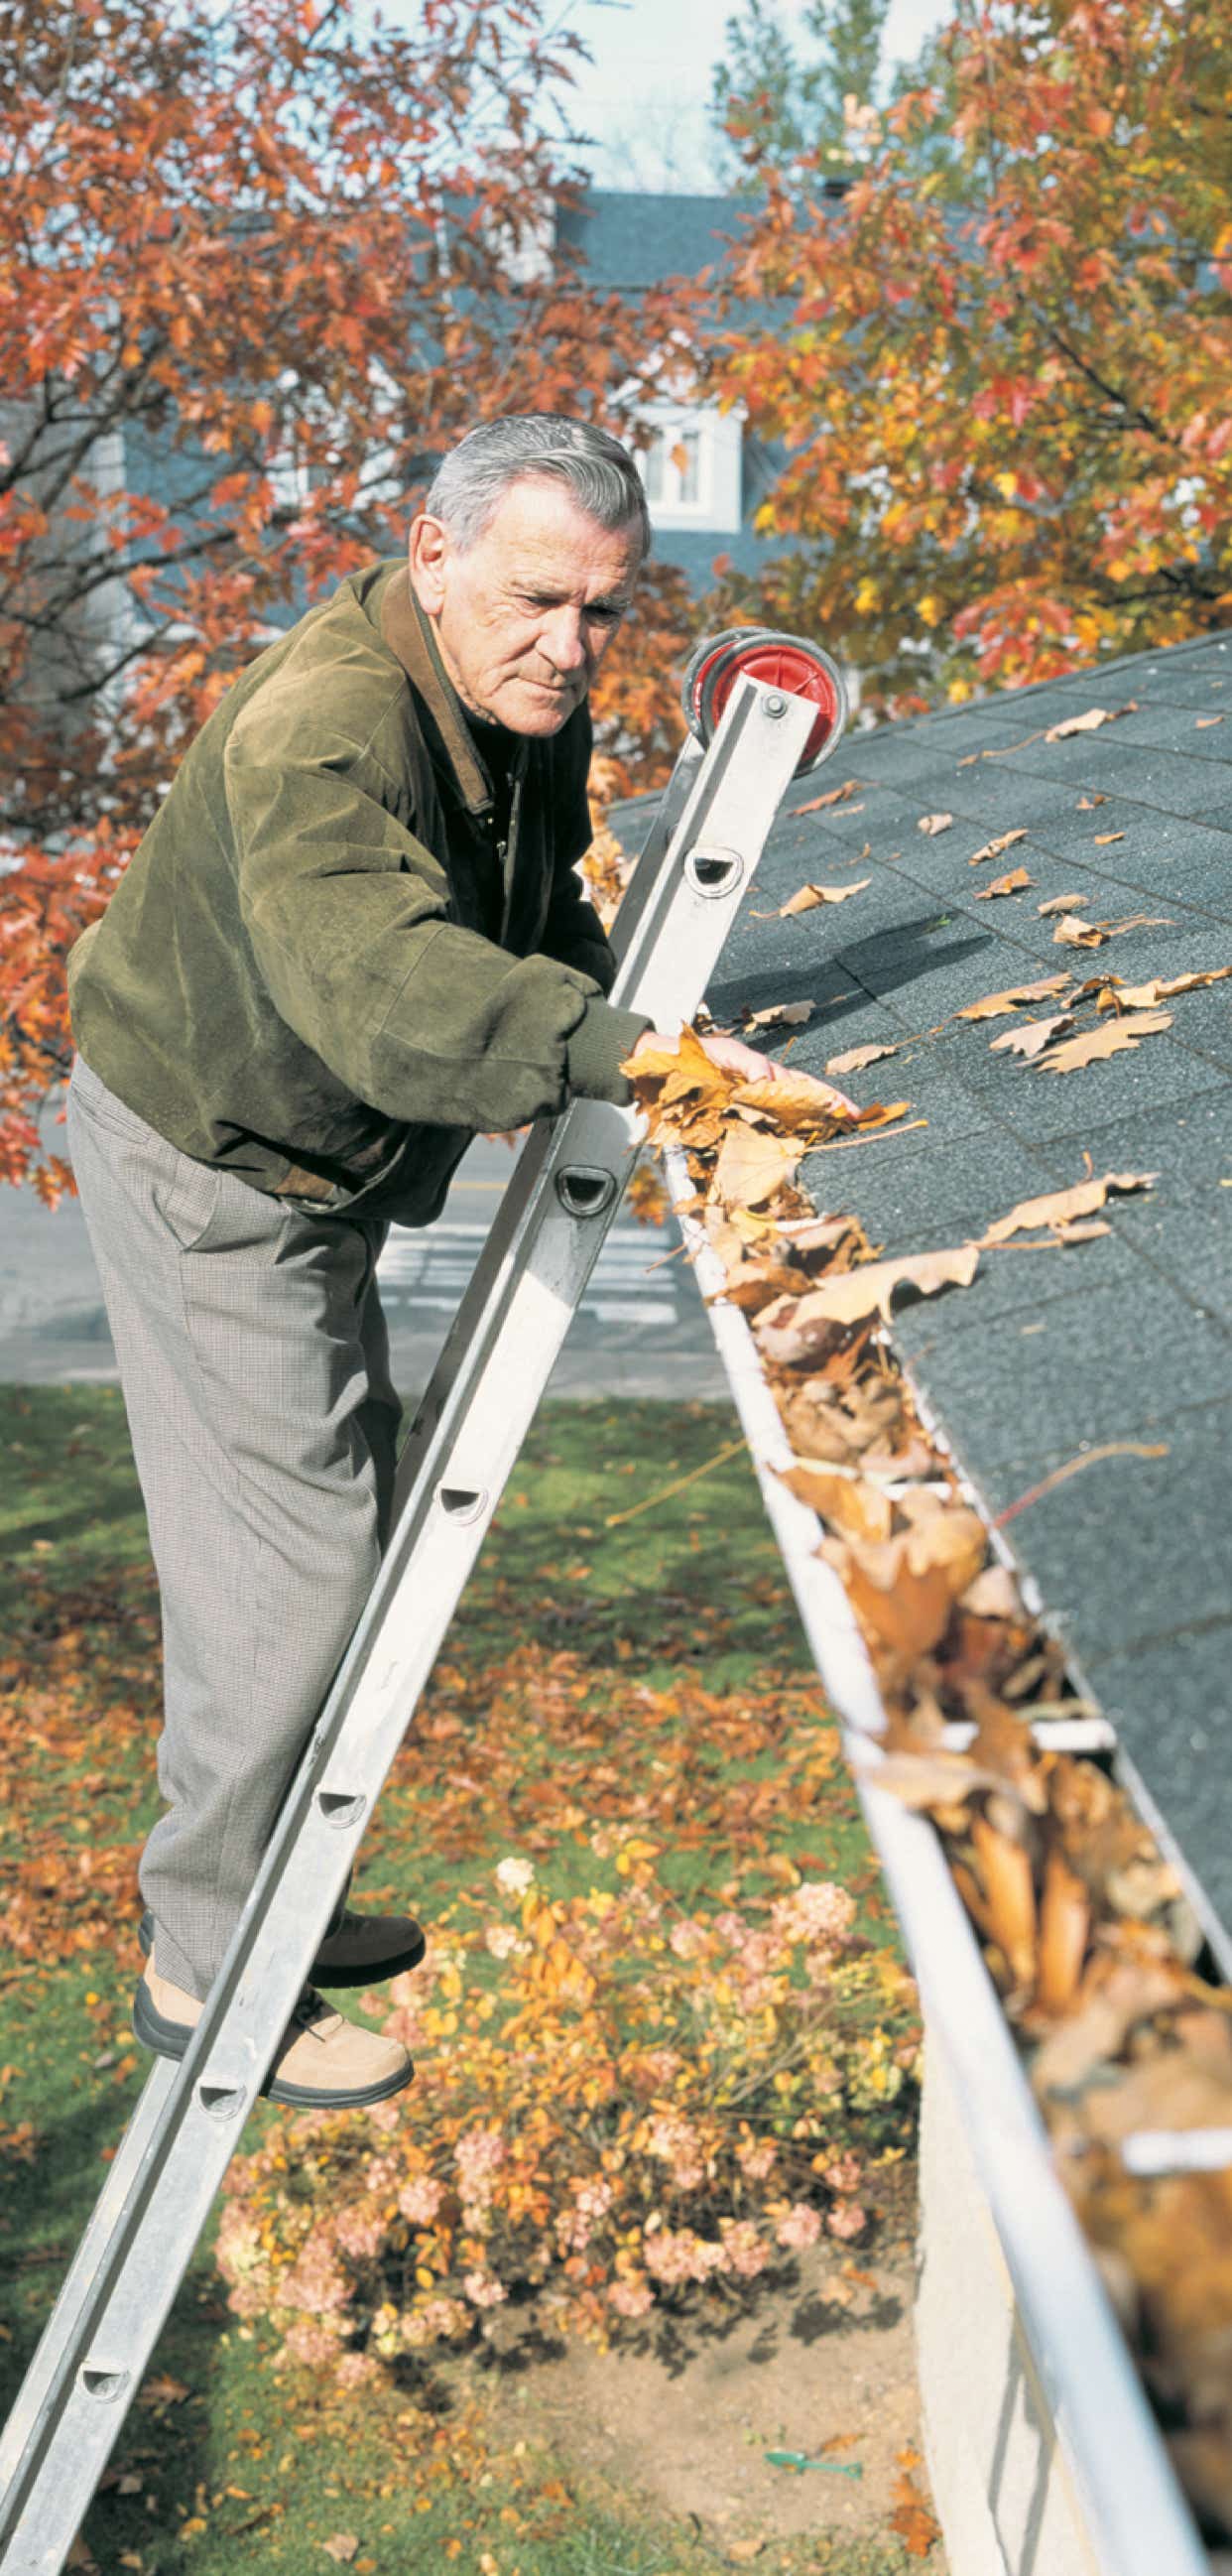 It is very dangerous to remove the leaves from the gutters ourselves